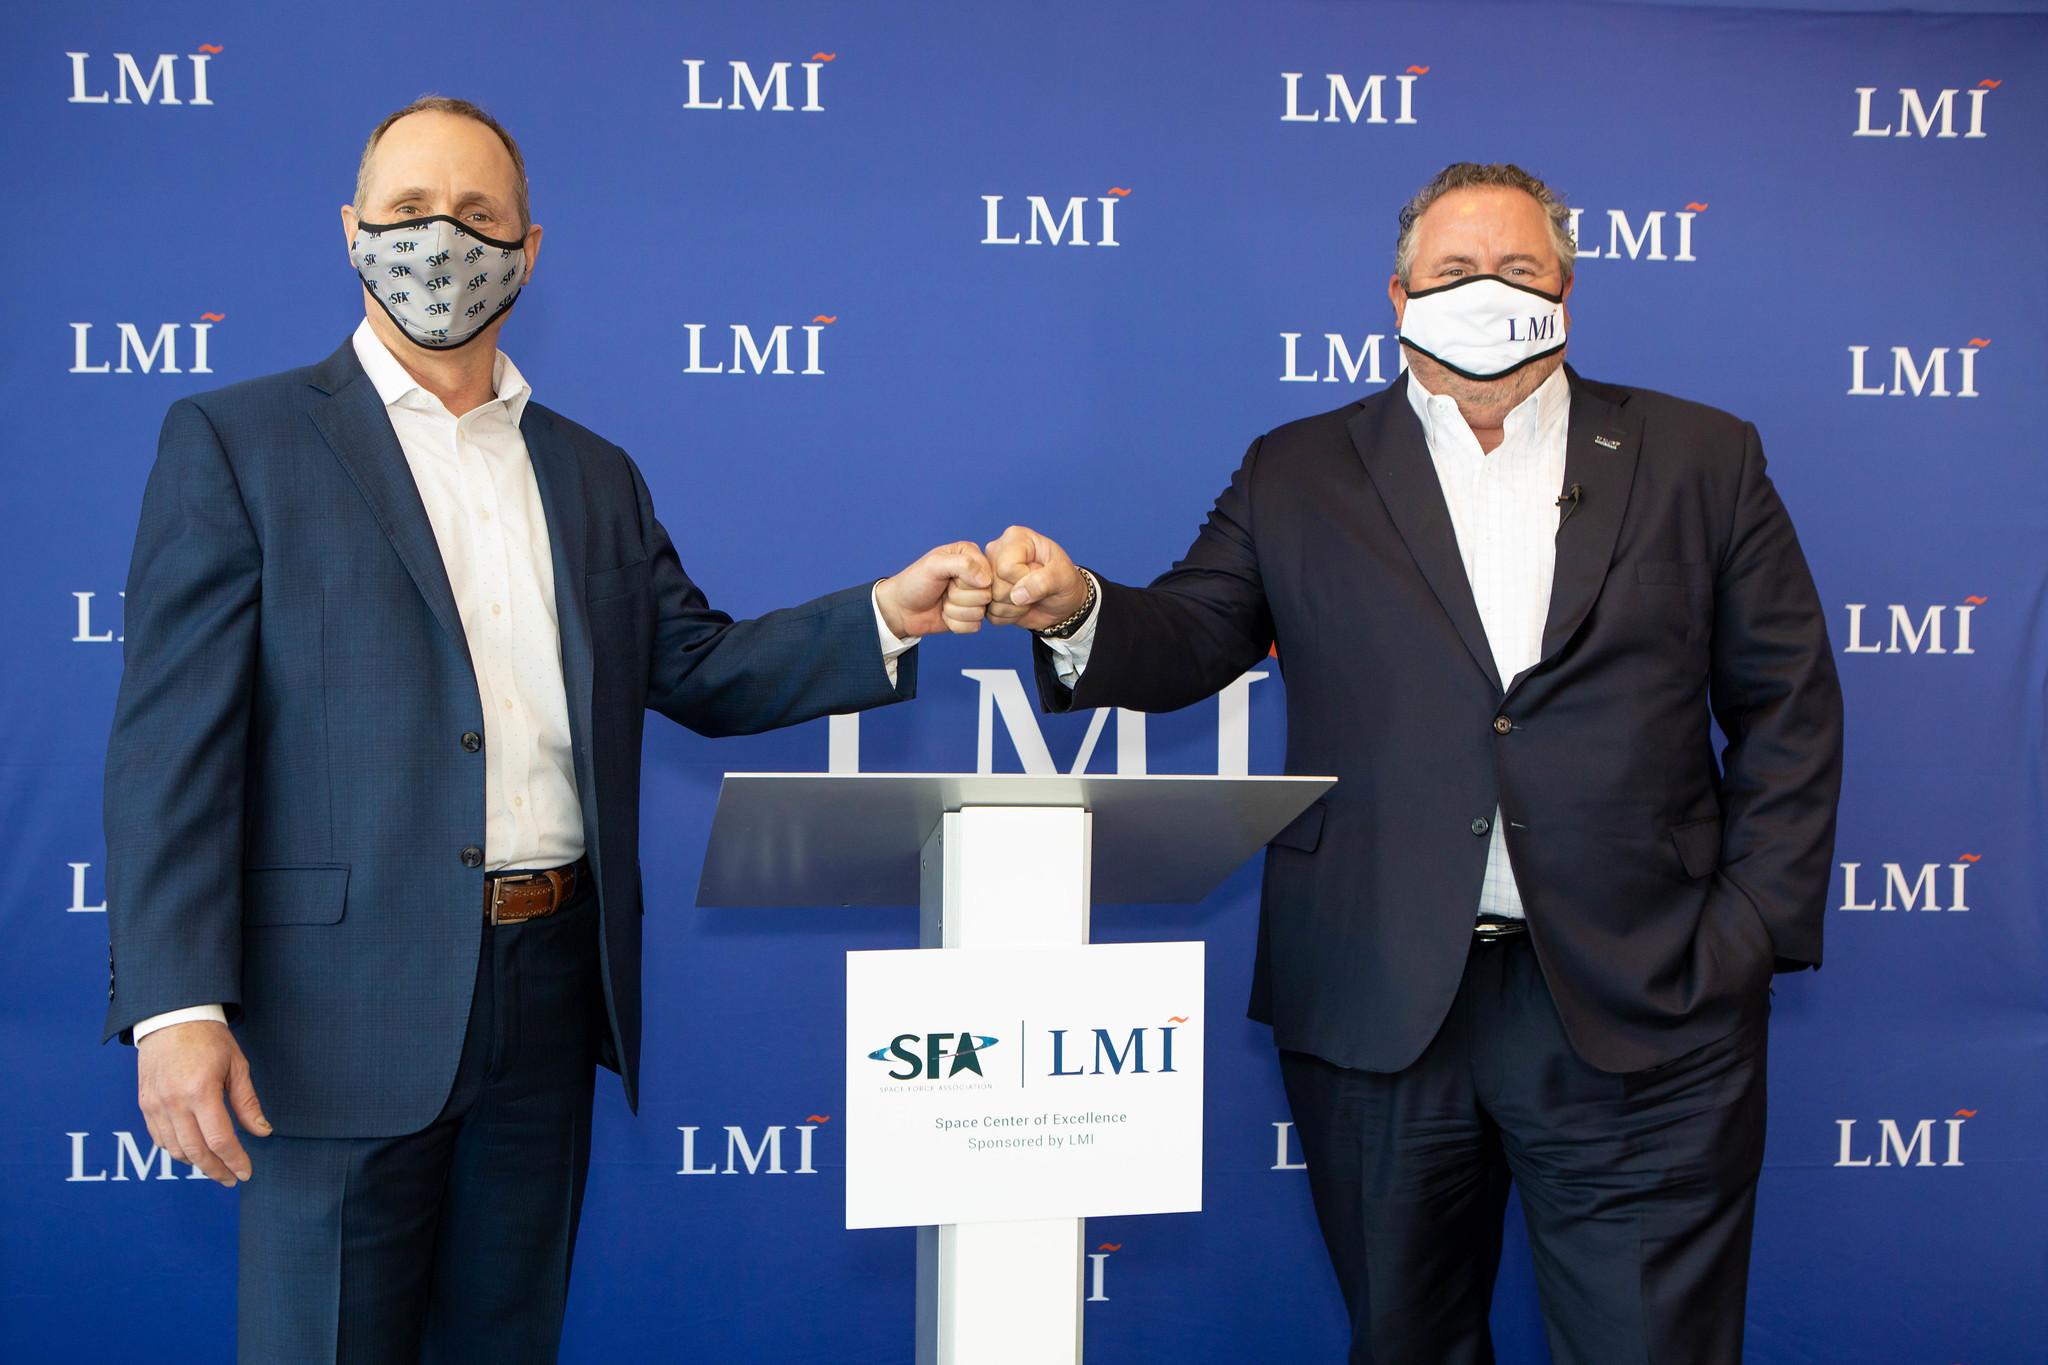 Bill Woolf (left), SFA’s president and founder with Doug Wagoner, LMI's CEO.